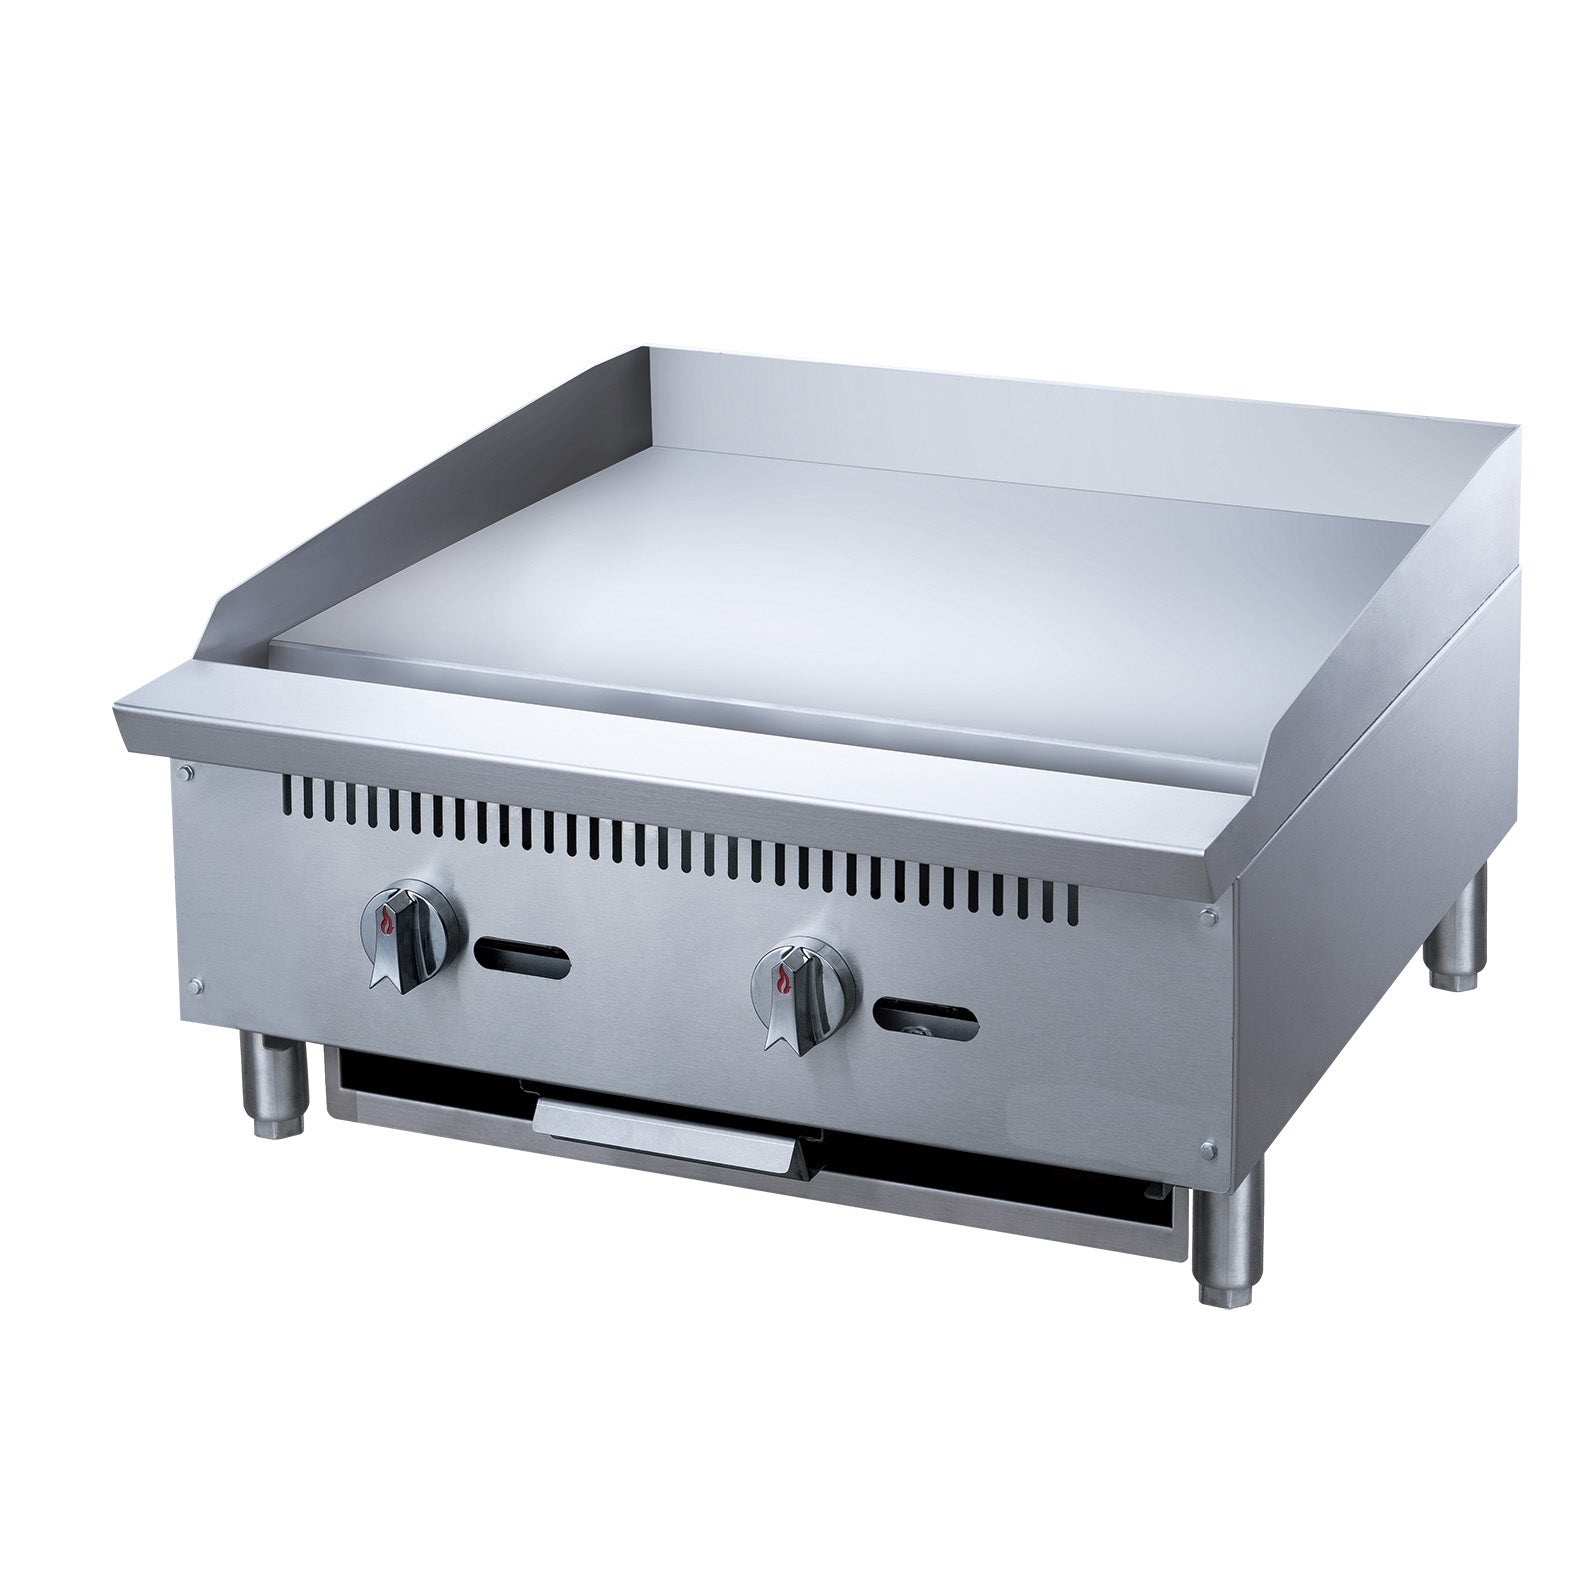 Migali C-G24 Two Burner Natural Gas 24 inch wide Stainless Steel Competitor  Series Countertop Griddles - with Manual Controls, 24W x 20L Cooking  Surface and 2 U shaped Burners